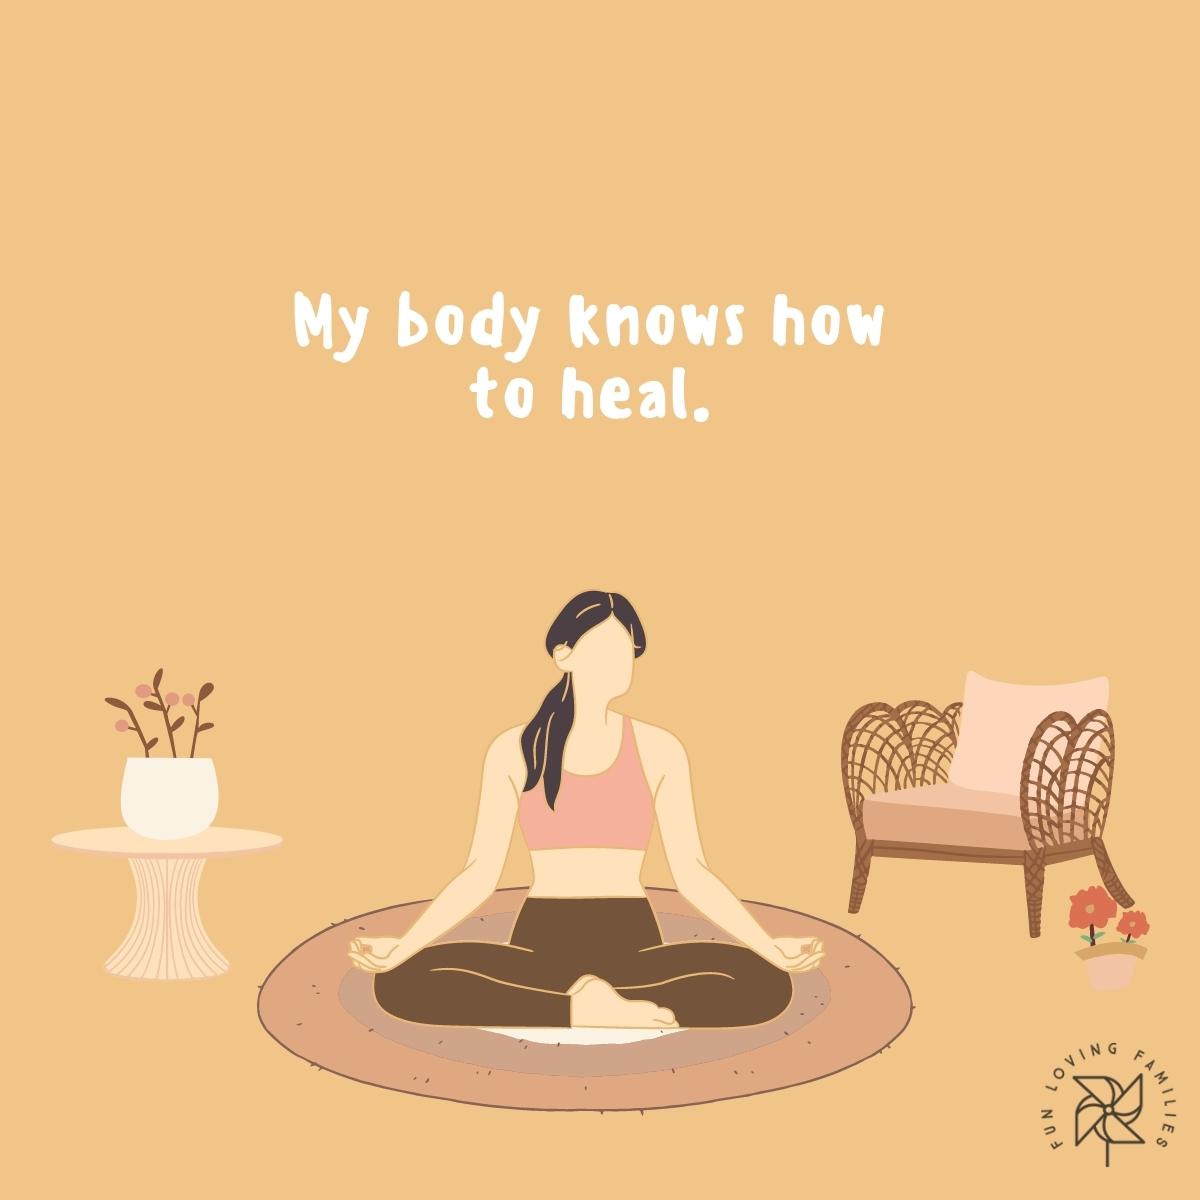 My body knows how to heal affirmation